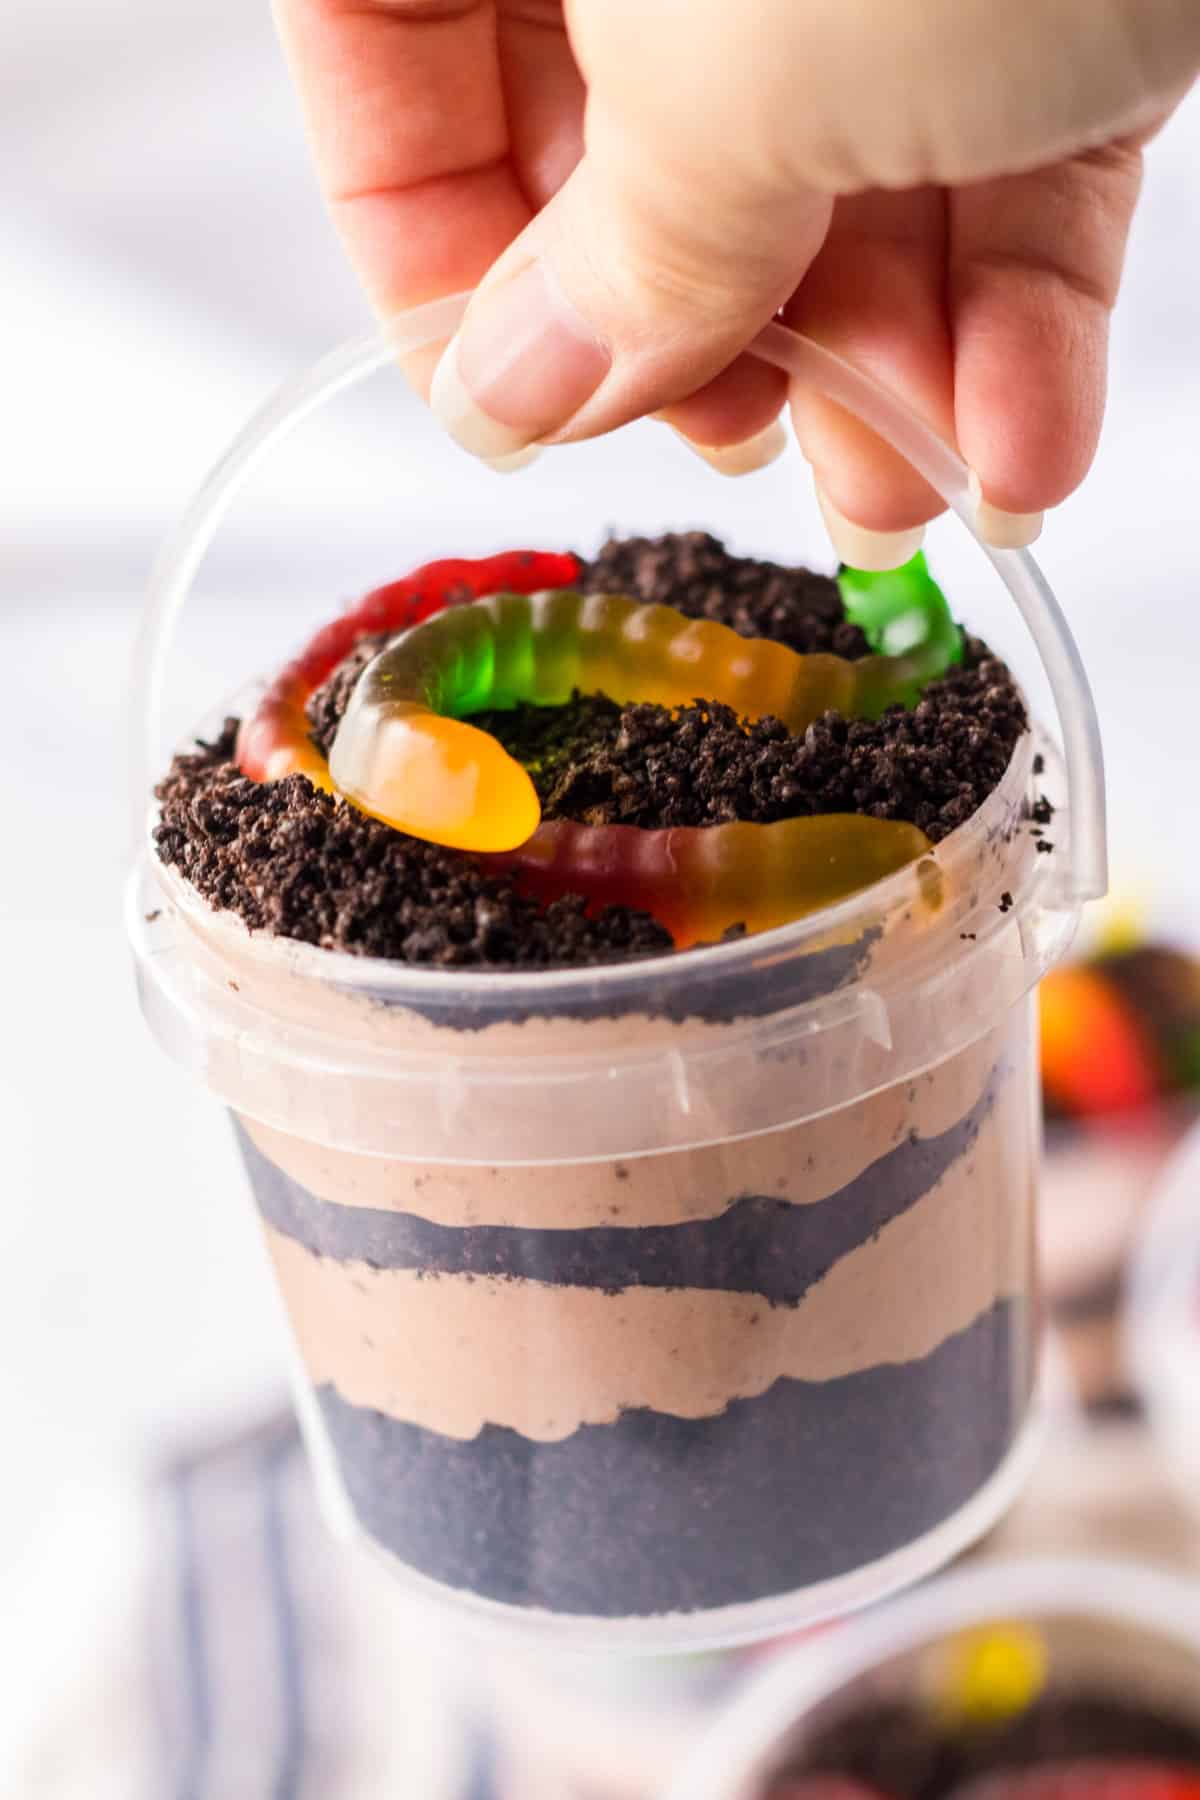 Hand holding oreo dirt pudding with gummy worms in small clear plastic pail.